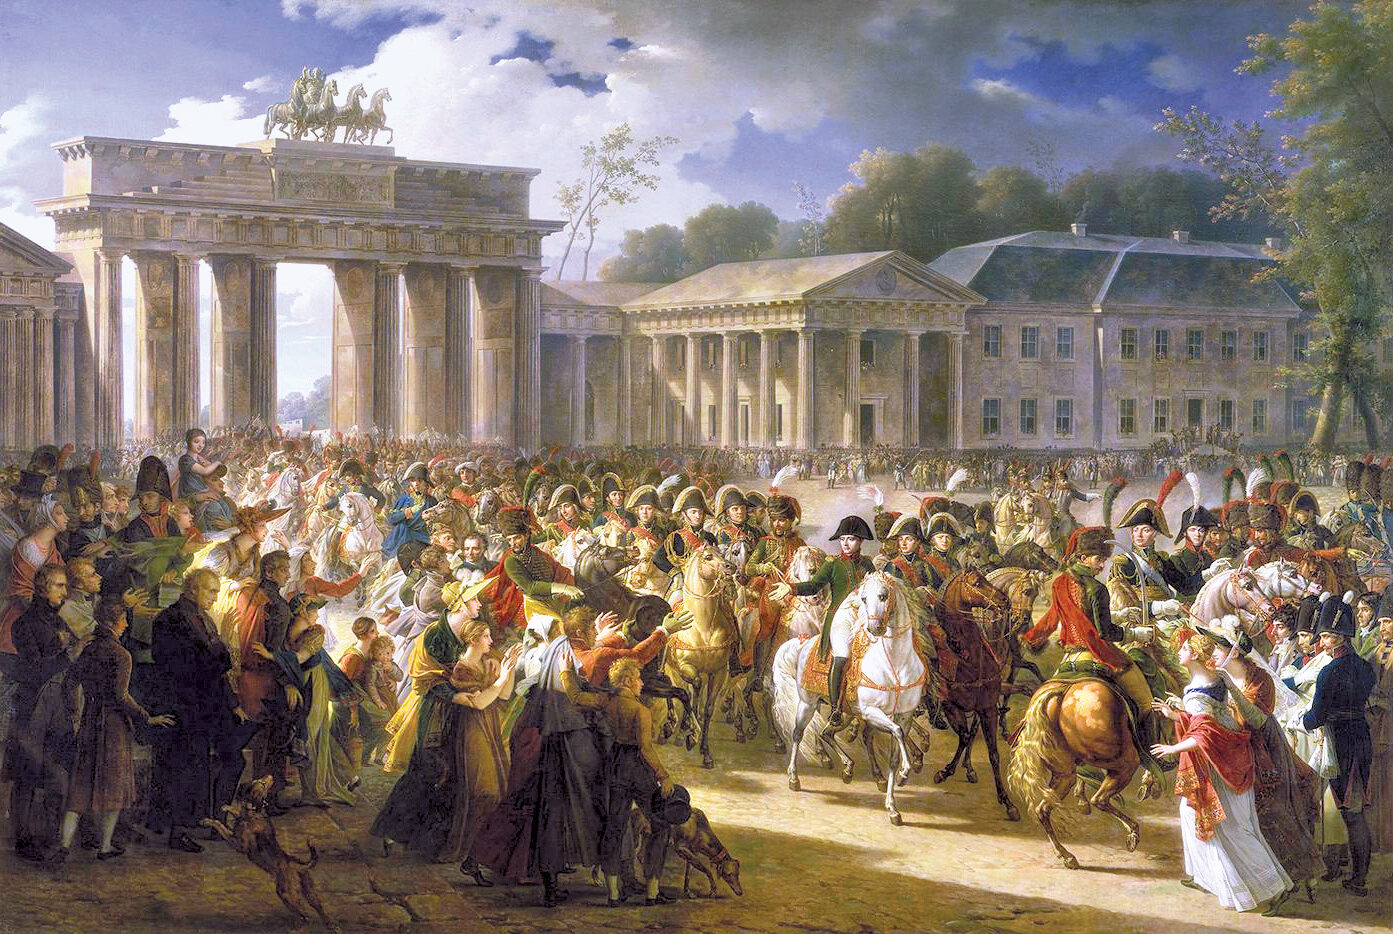 Napoleon’s Grande Armee enters Berlin in triumph in Charles Meynier’s period painting. The upshot of his double victory was that Prussia became a French vassal for six years.